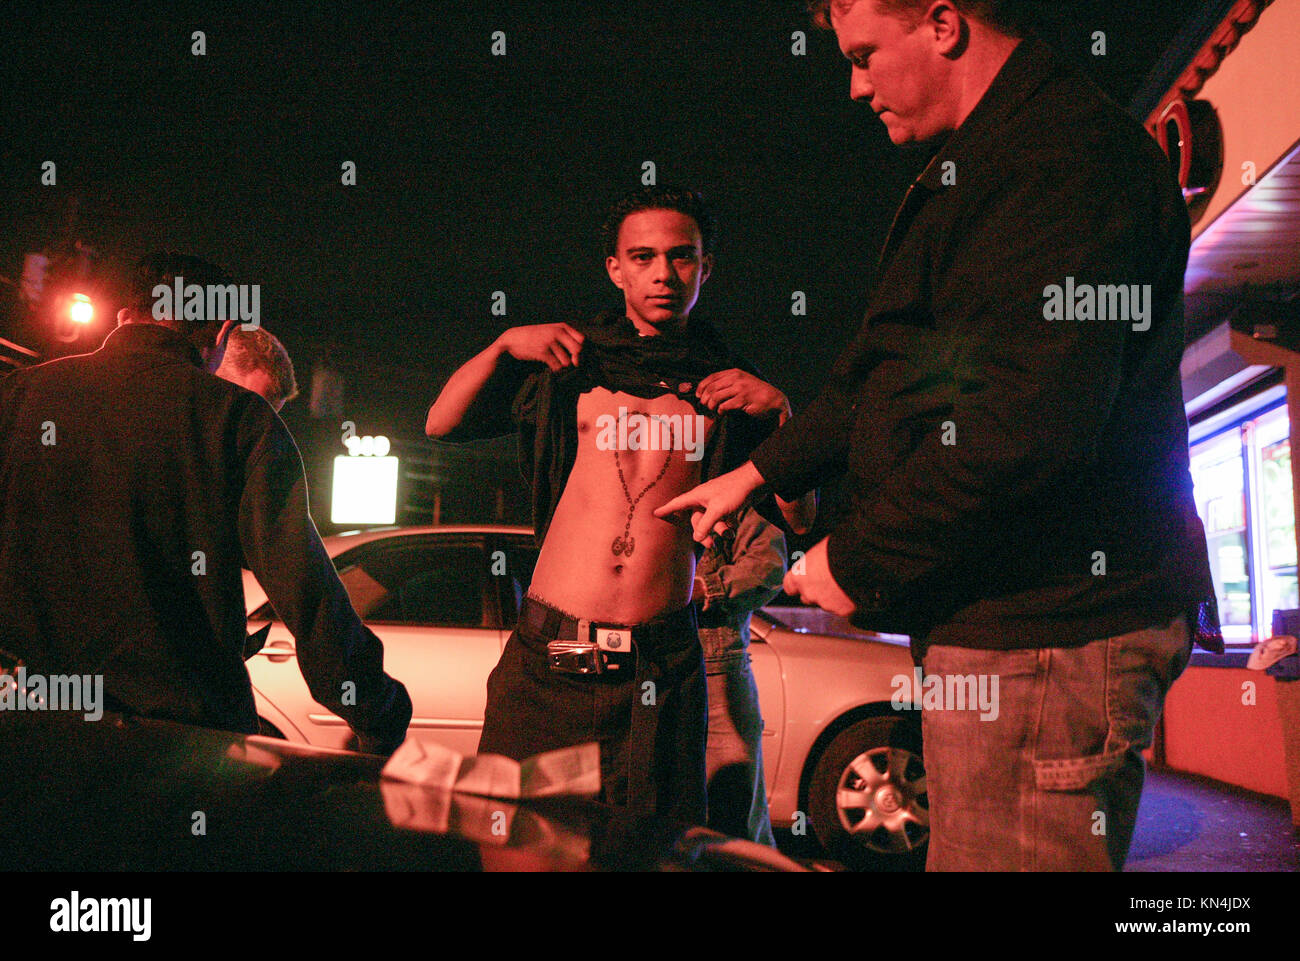 Suffolk County Police officers from the anti-gang unit check for tattoos and identity papers of possible gang members of Mara Salvatrucha 13 or MS-13 in Brentwood, New York. Many of the MS-13 members are in the U.S. illegally with false documents. The young man from Honduras, center, does have a green card and is a MS-13 member. Stock Photo